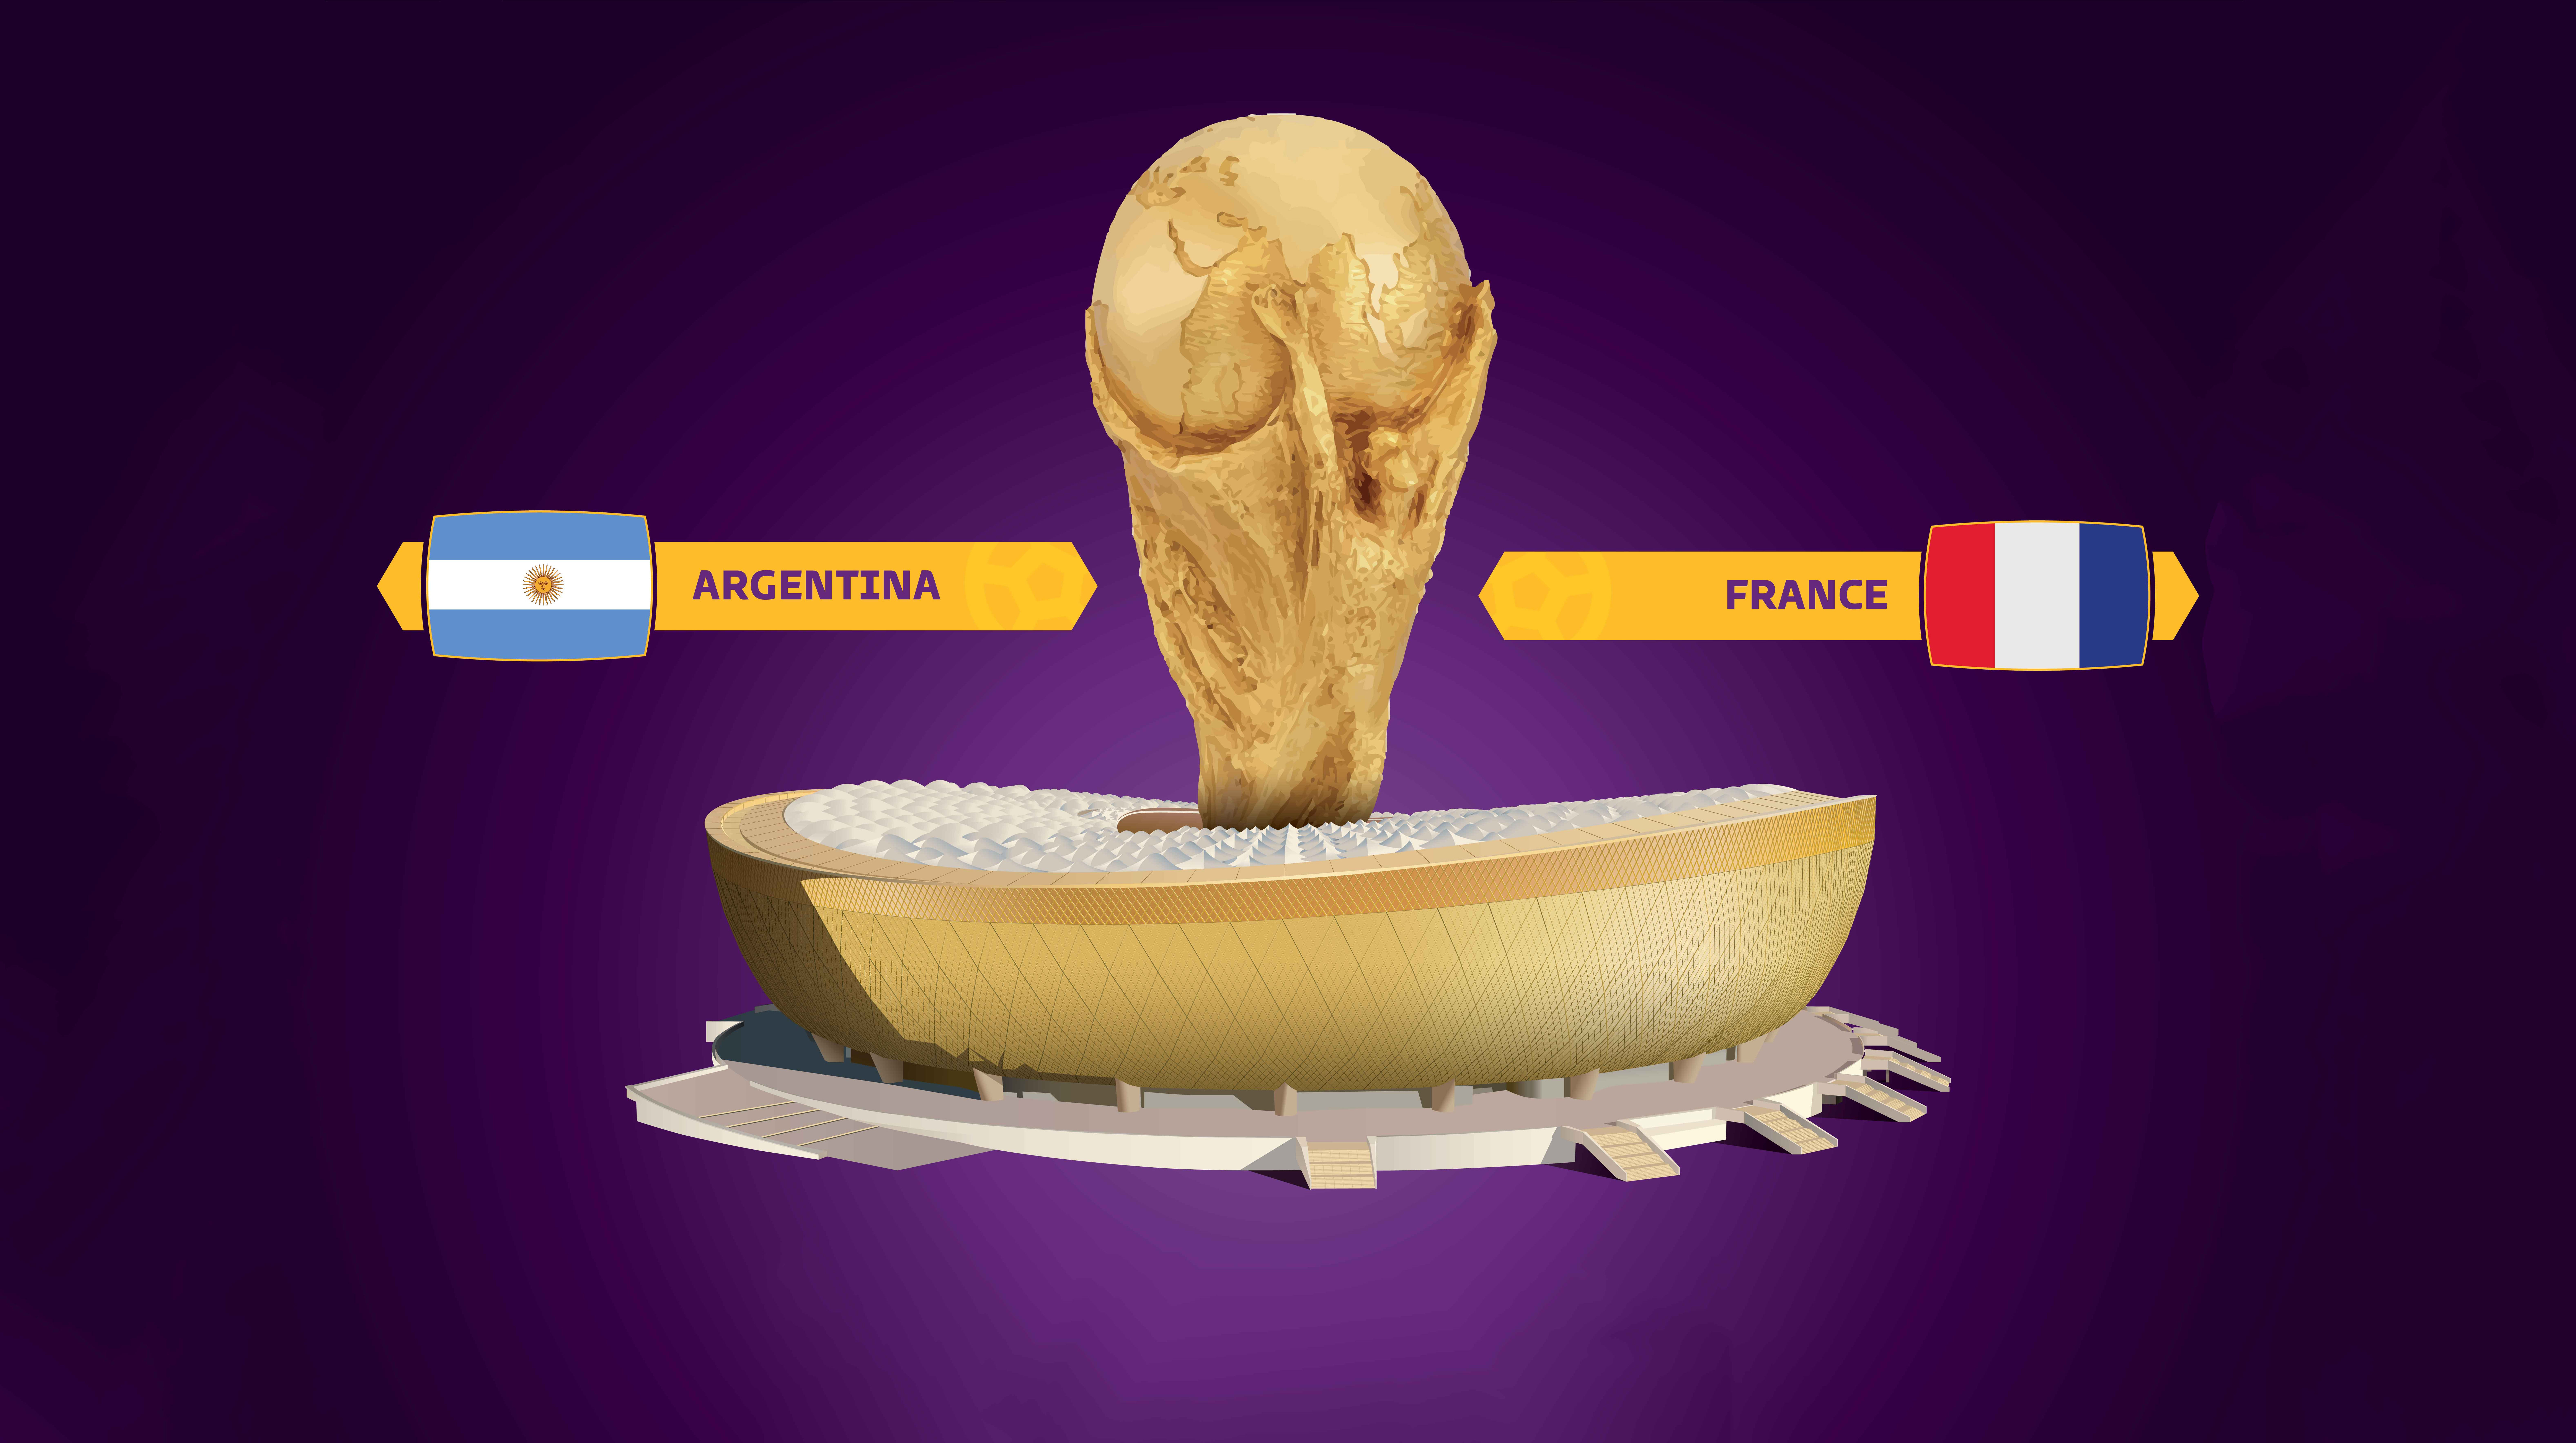 How to watch Argentina vs. France in the 2022 FIFA World Cup final today